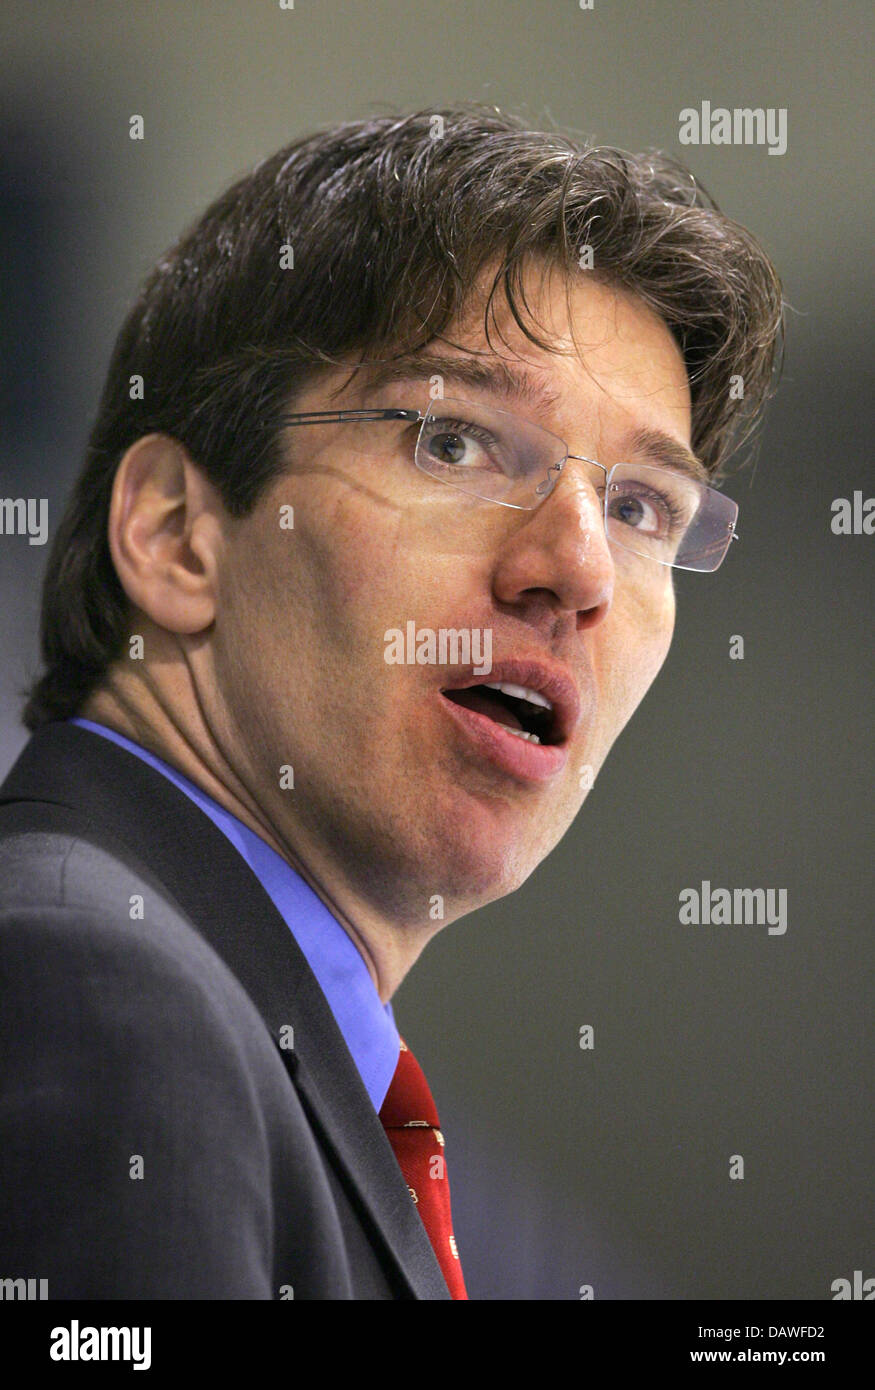 Coach of the German ice hockey national team, Uwe Krupp, observes the score board during the internationonal match versus Denmark in Kassel, Germany, Thursday 12 April 2007. Photo: Uwe Zucchi Stock Photo